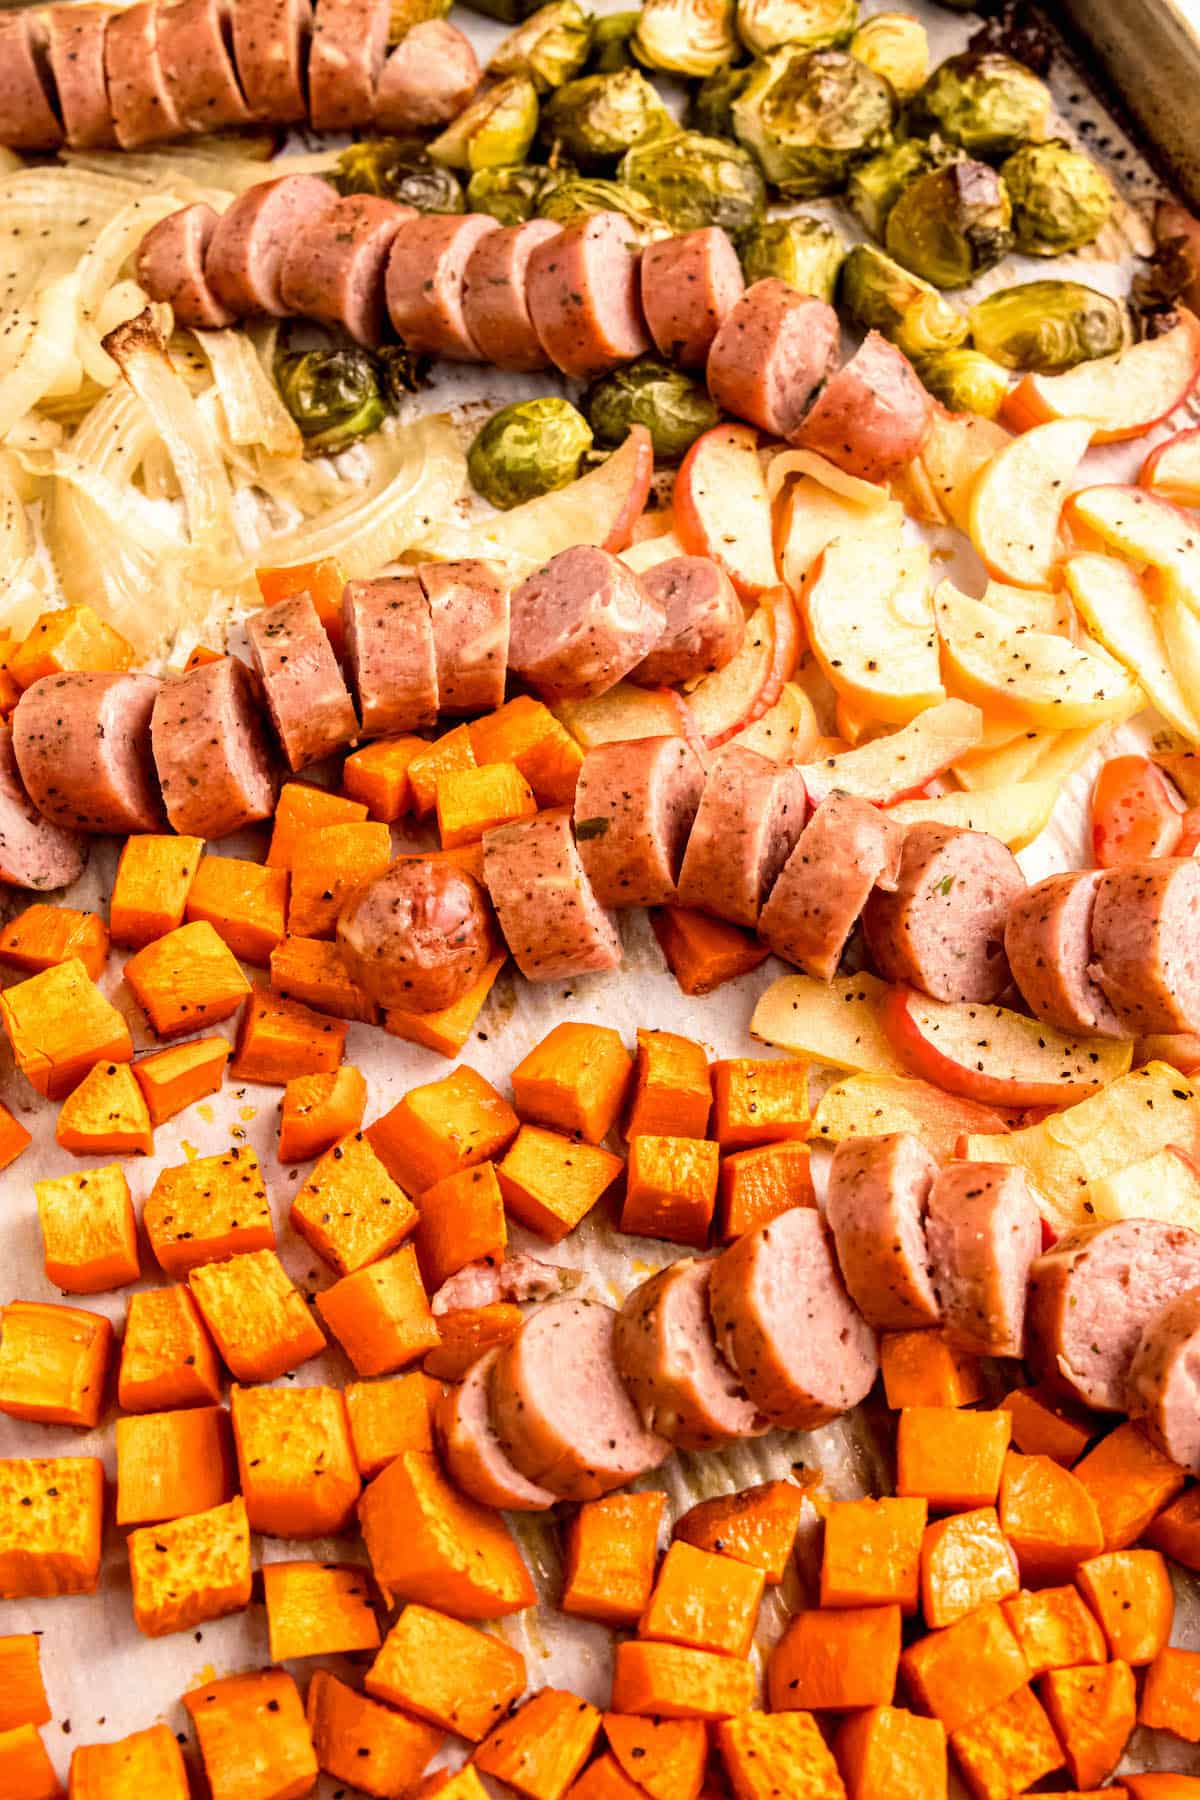 colorful sheet pan dinner with sliced chicken apple sausage, sliced apples, and veggies that have all been roasted together.